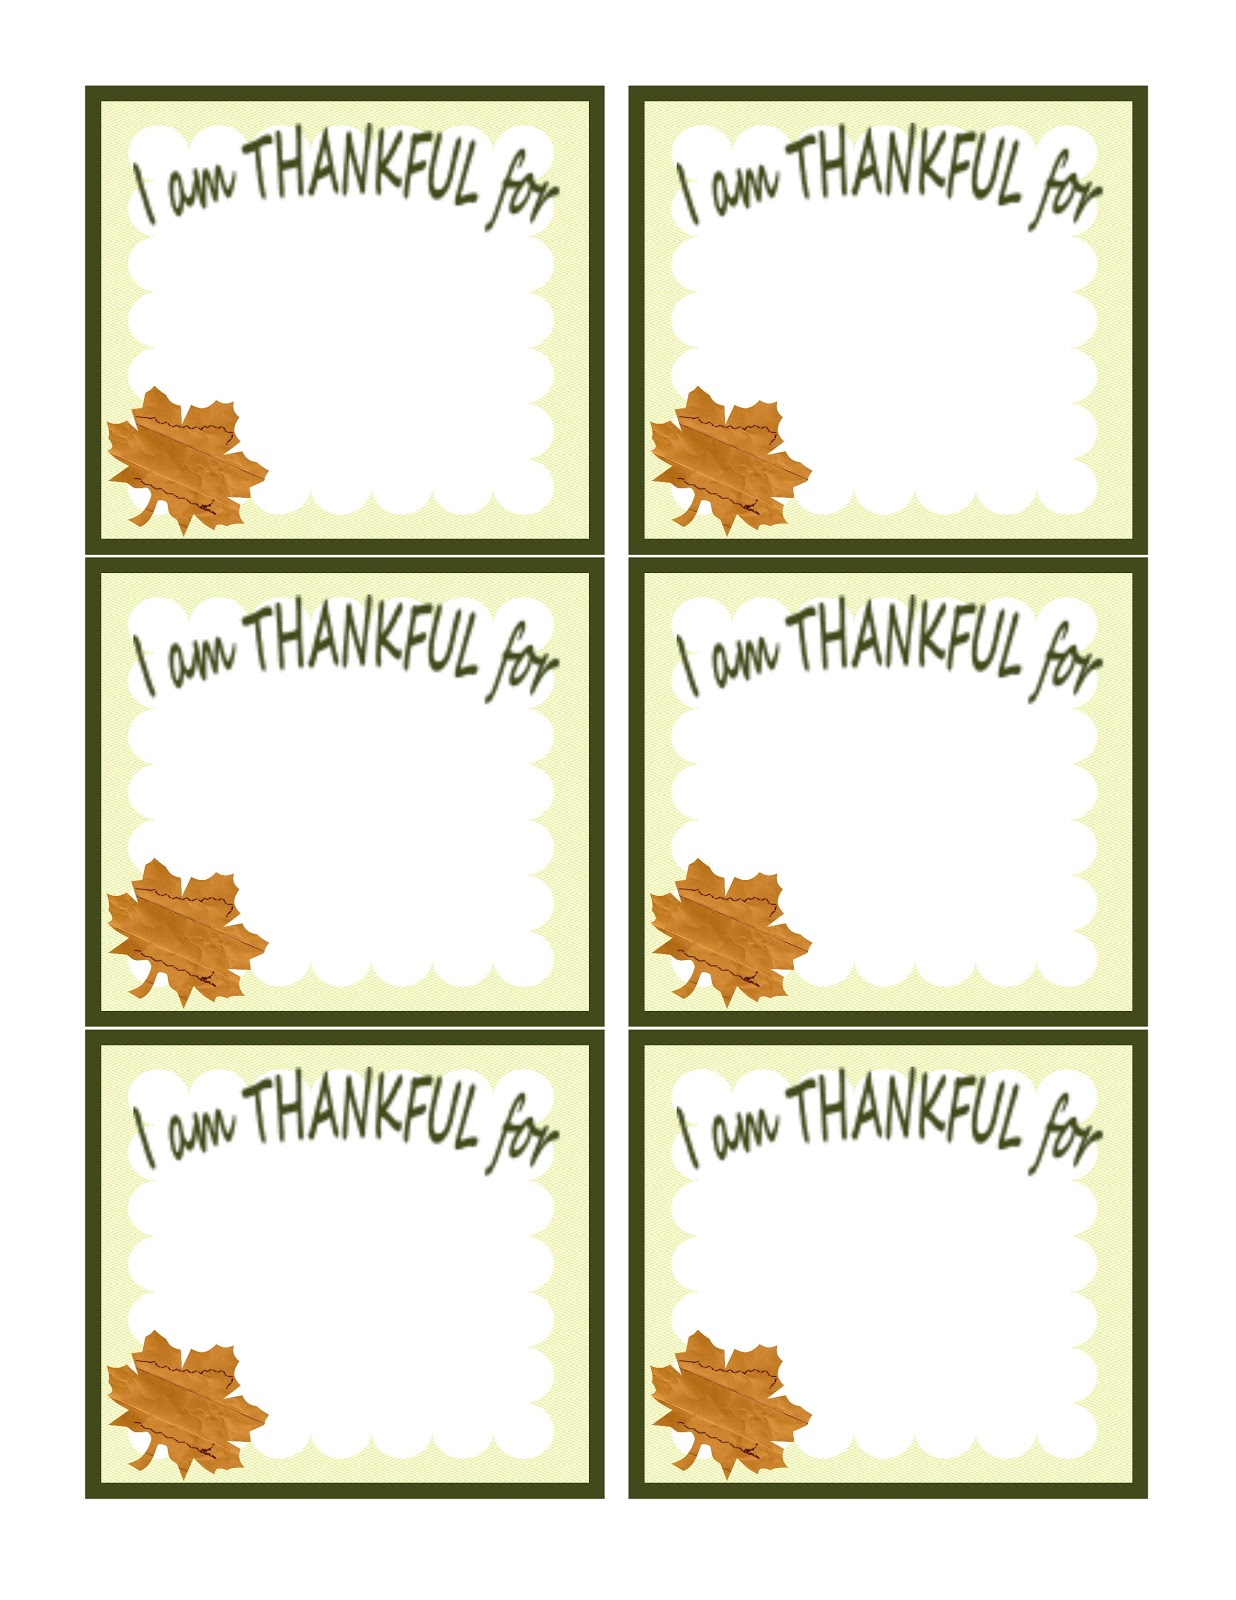 i-am-thankful-for-printables-printable-word-searches